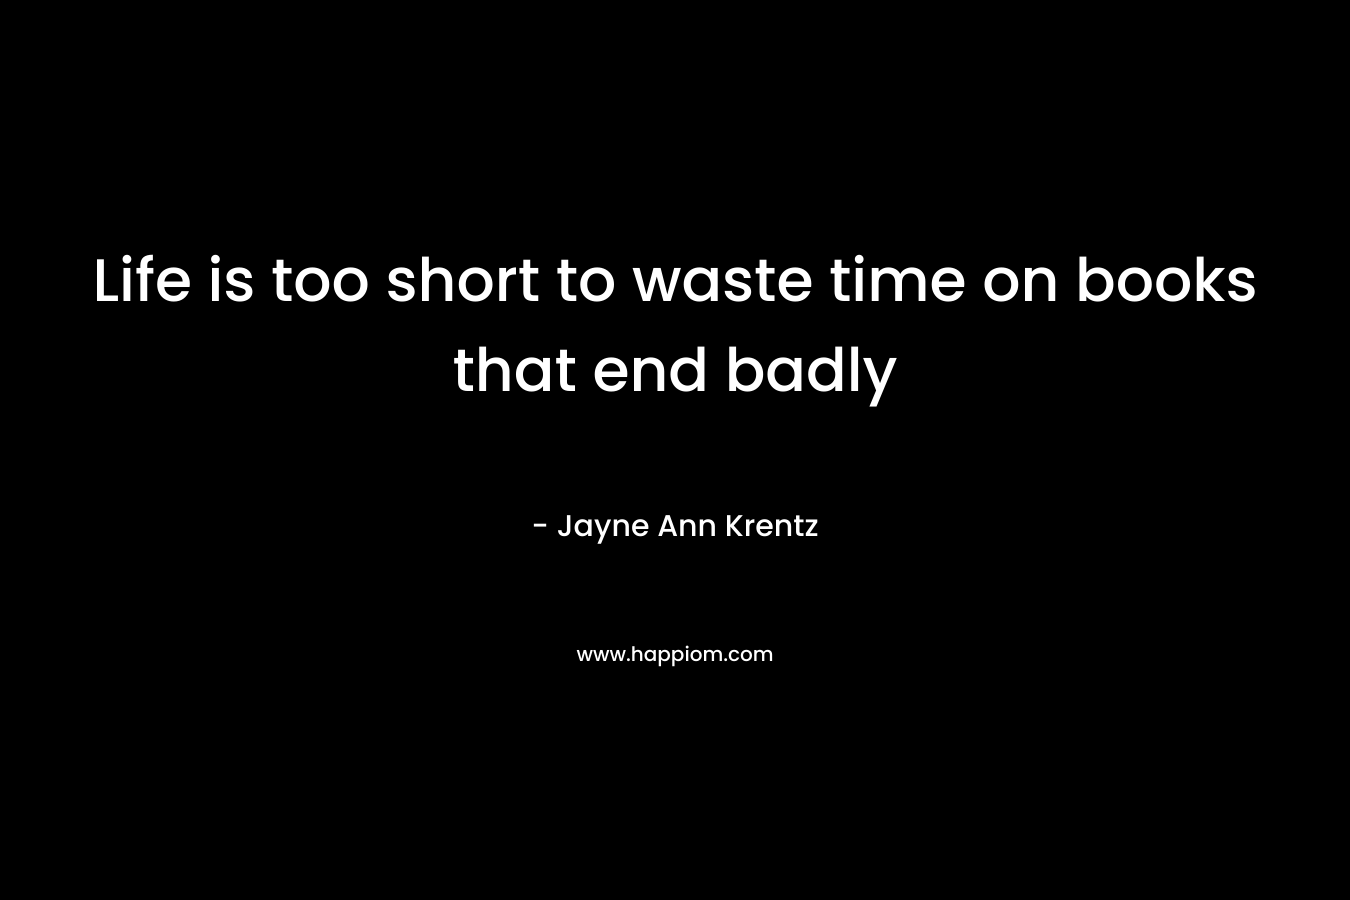 Life is too short to waste time on books that end badly – Jayne Ann Krentz